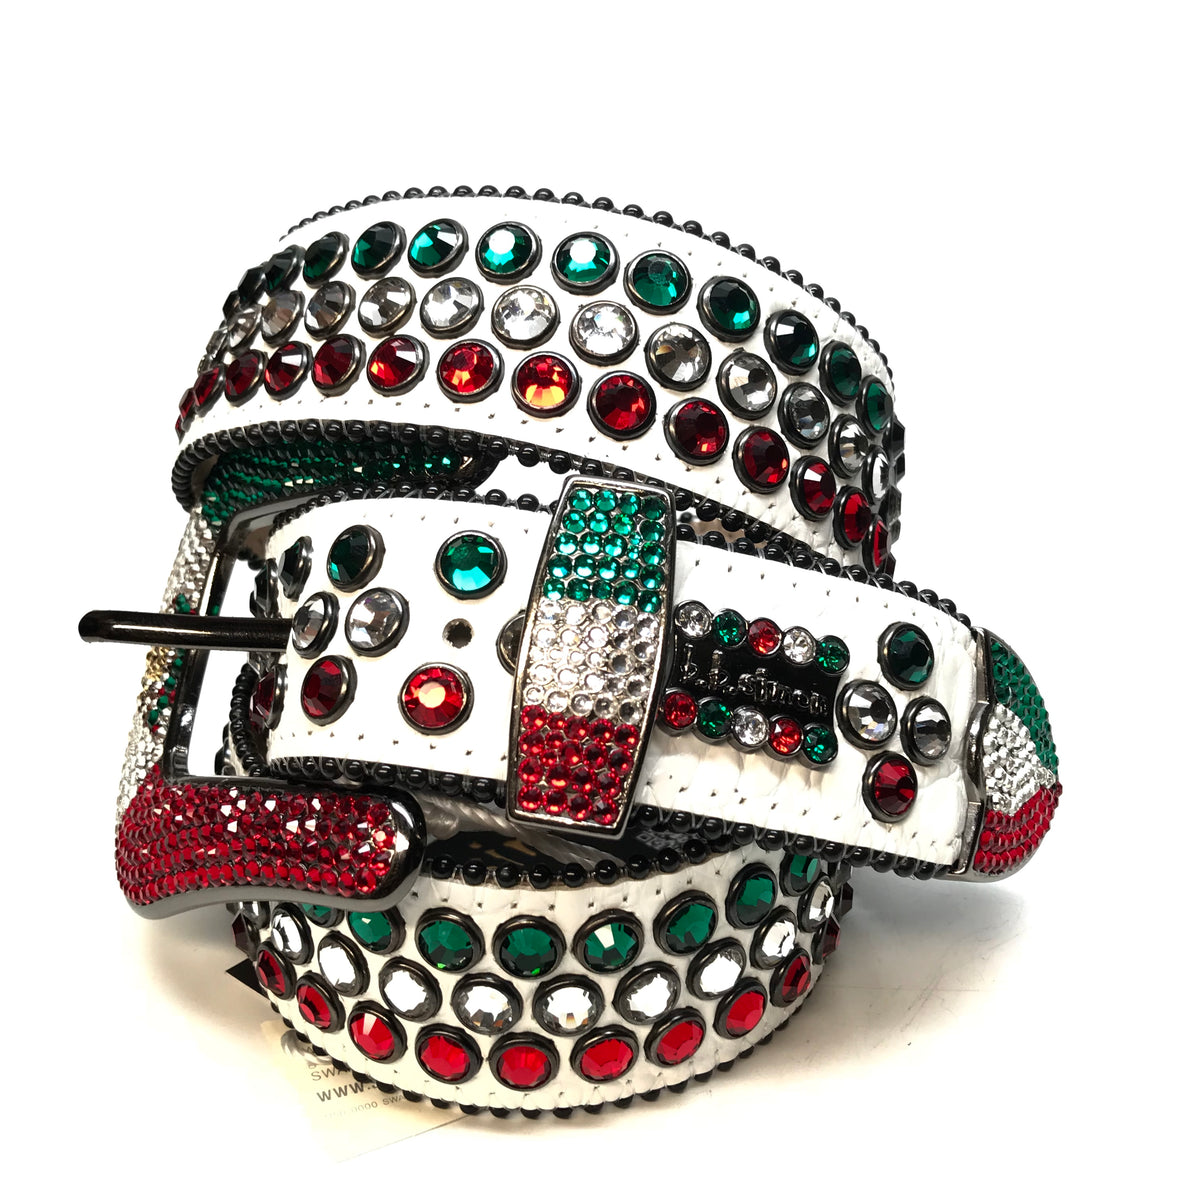 b.b. Simon "Mexican Flag" Fully Loaded Crystal Belt - Dudes Boutique